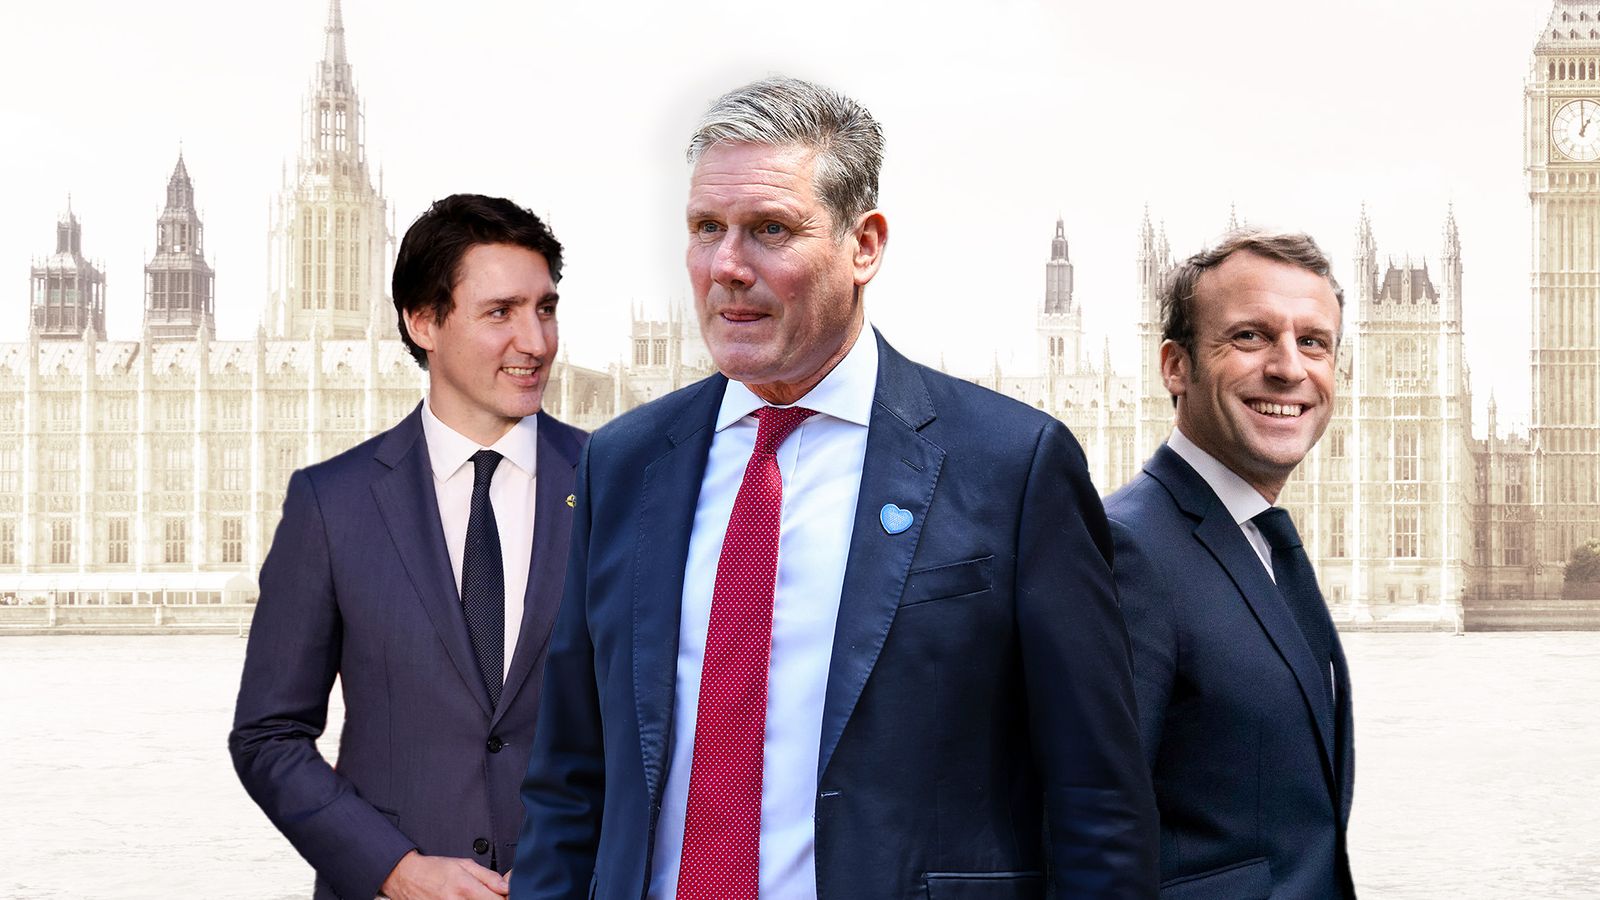 Adam Boulton: A general election isn't far away - and Labour need to make Sir Keir Starmer look like a prime minister